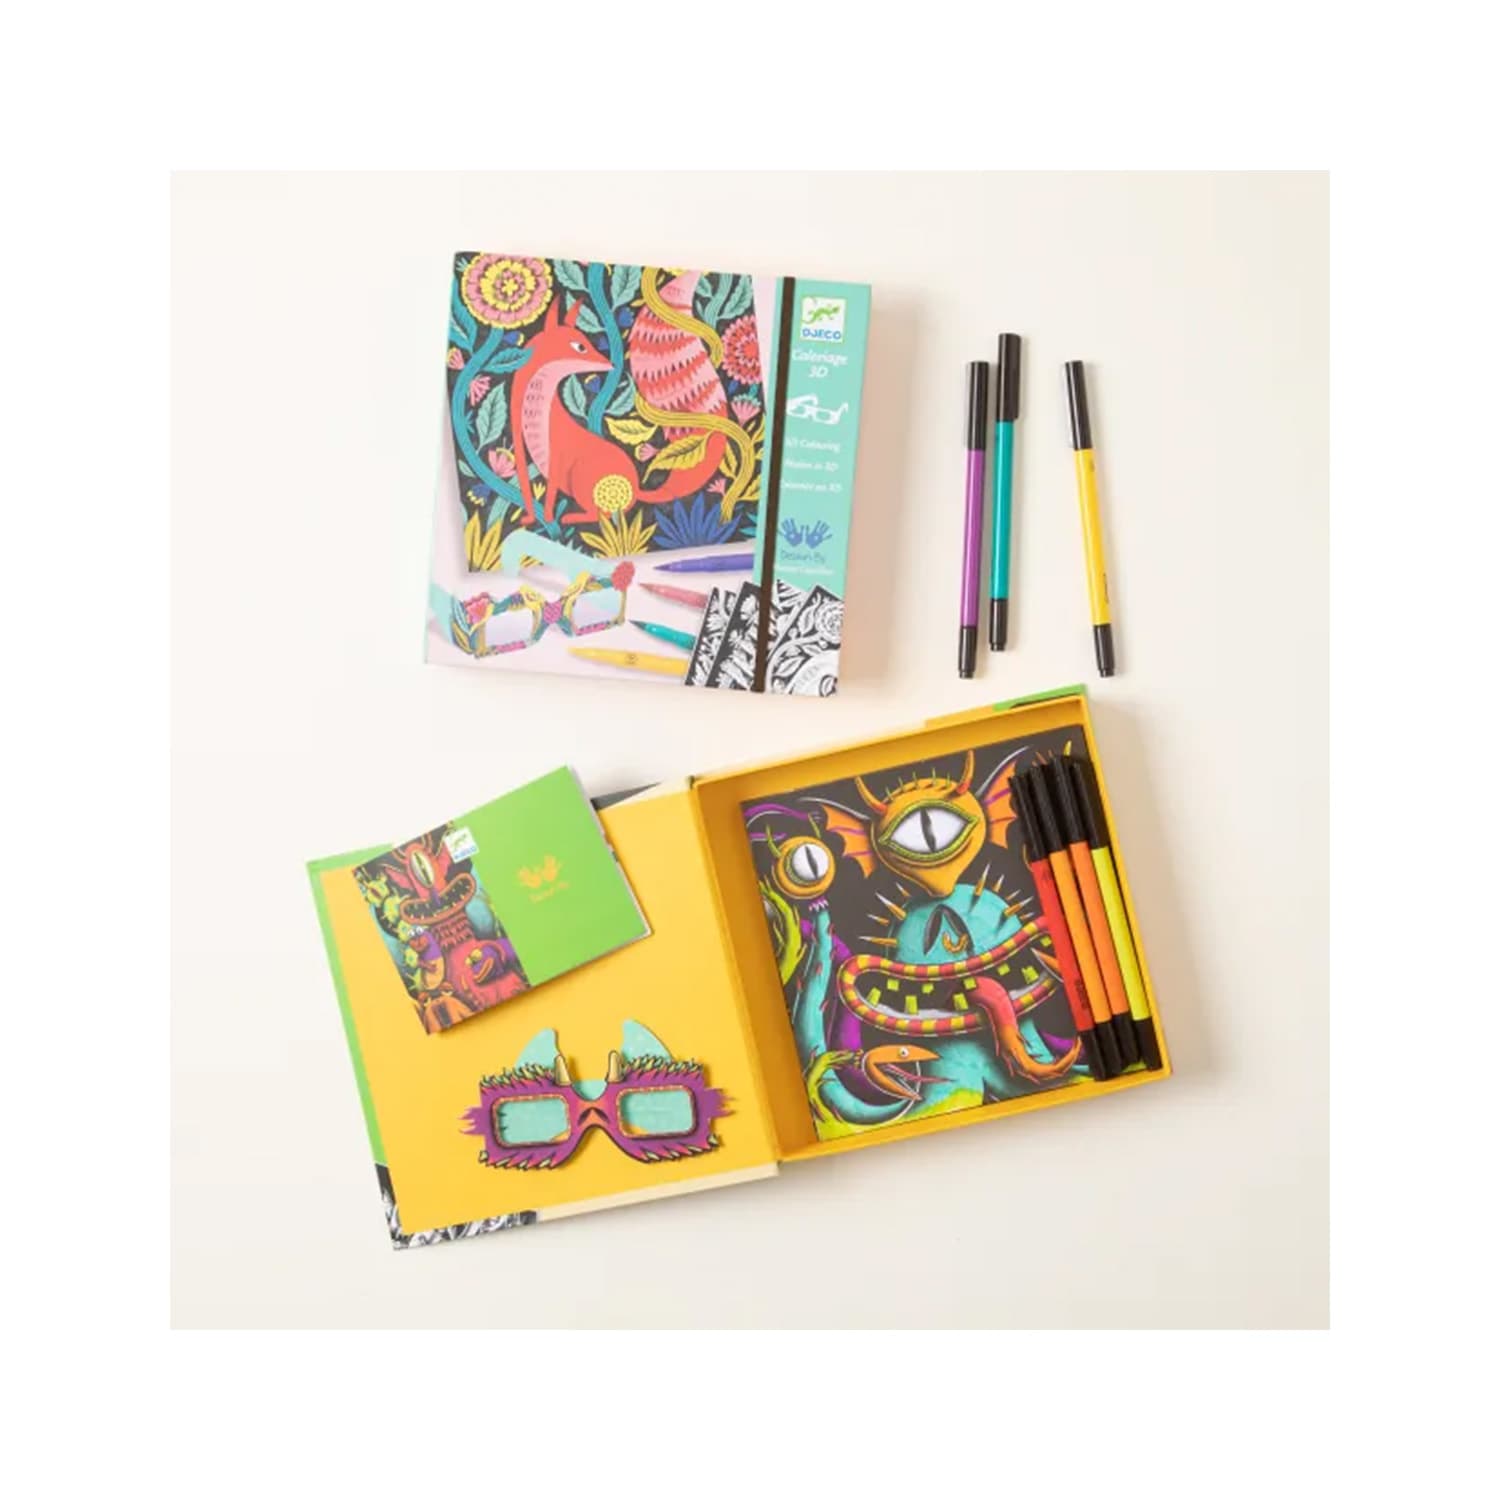 Best Art Supplies For Kids 2023 - Forbes Vetted